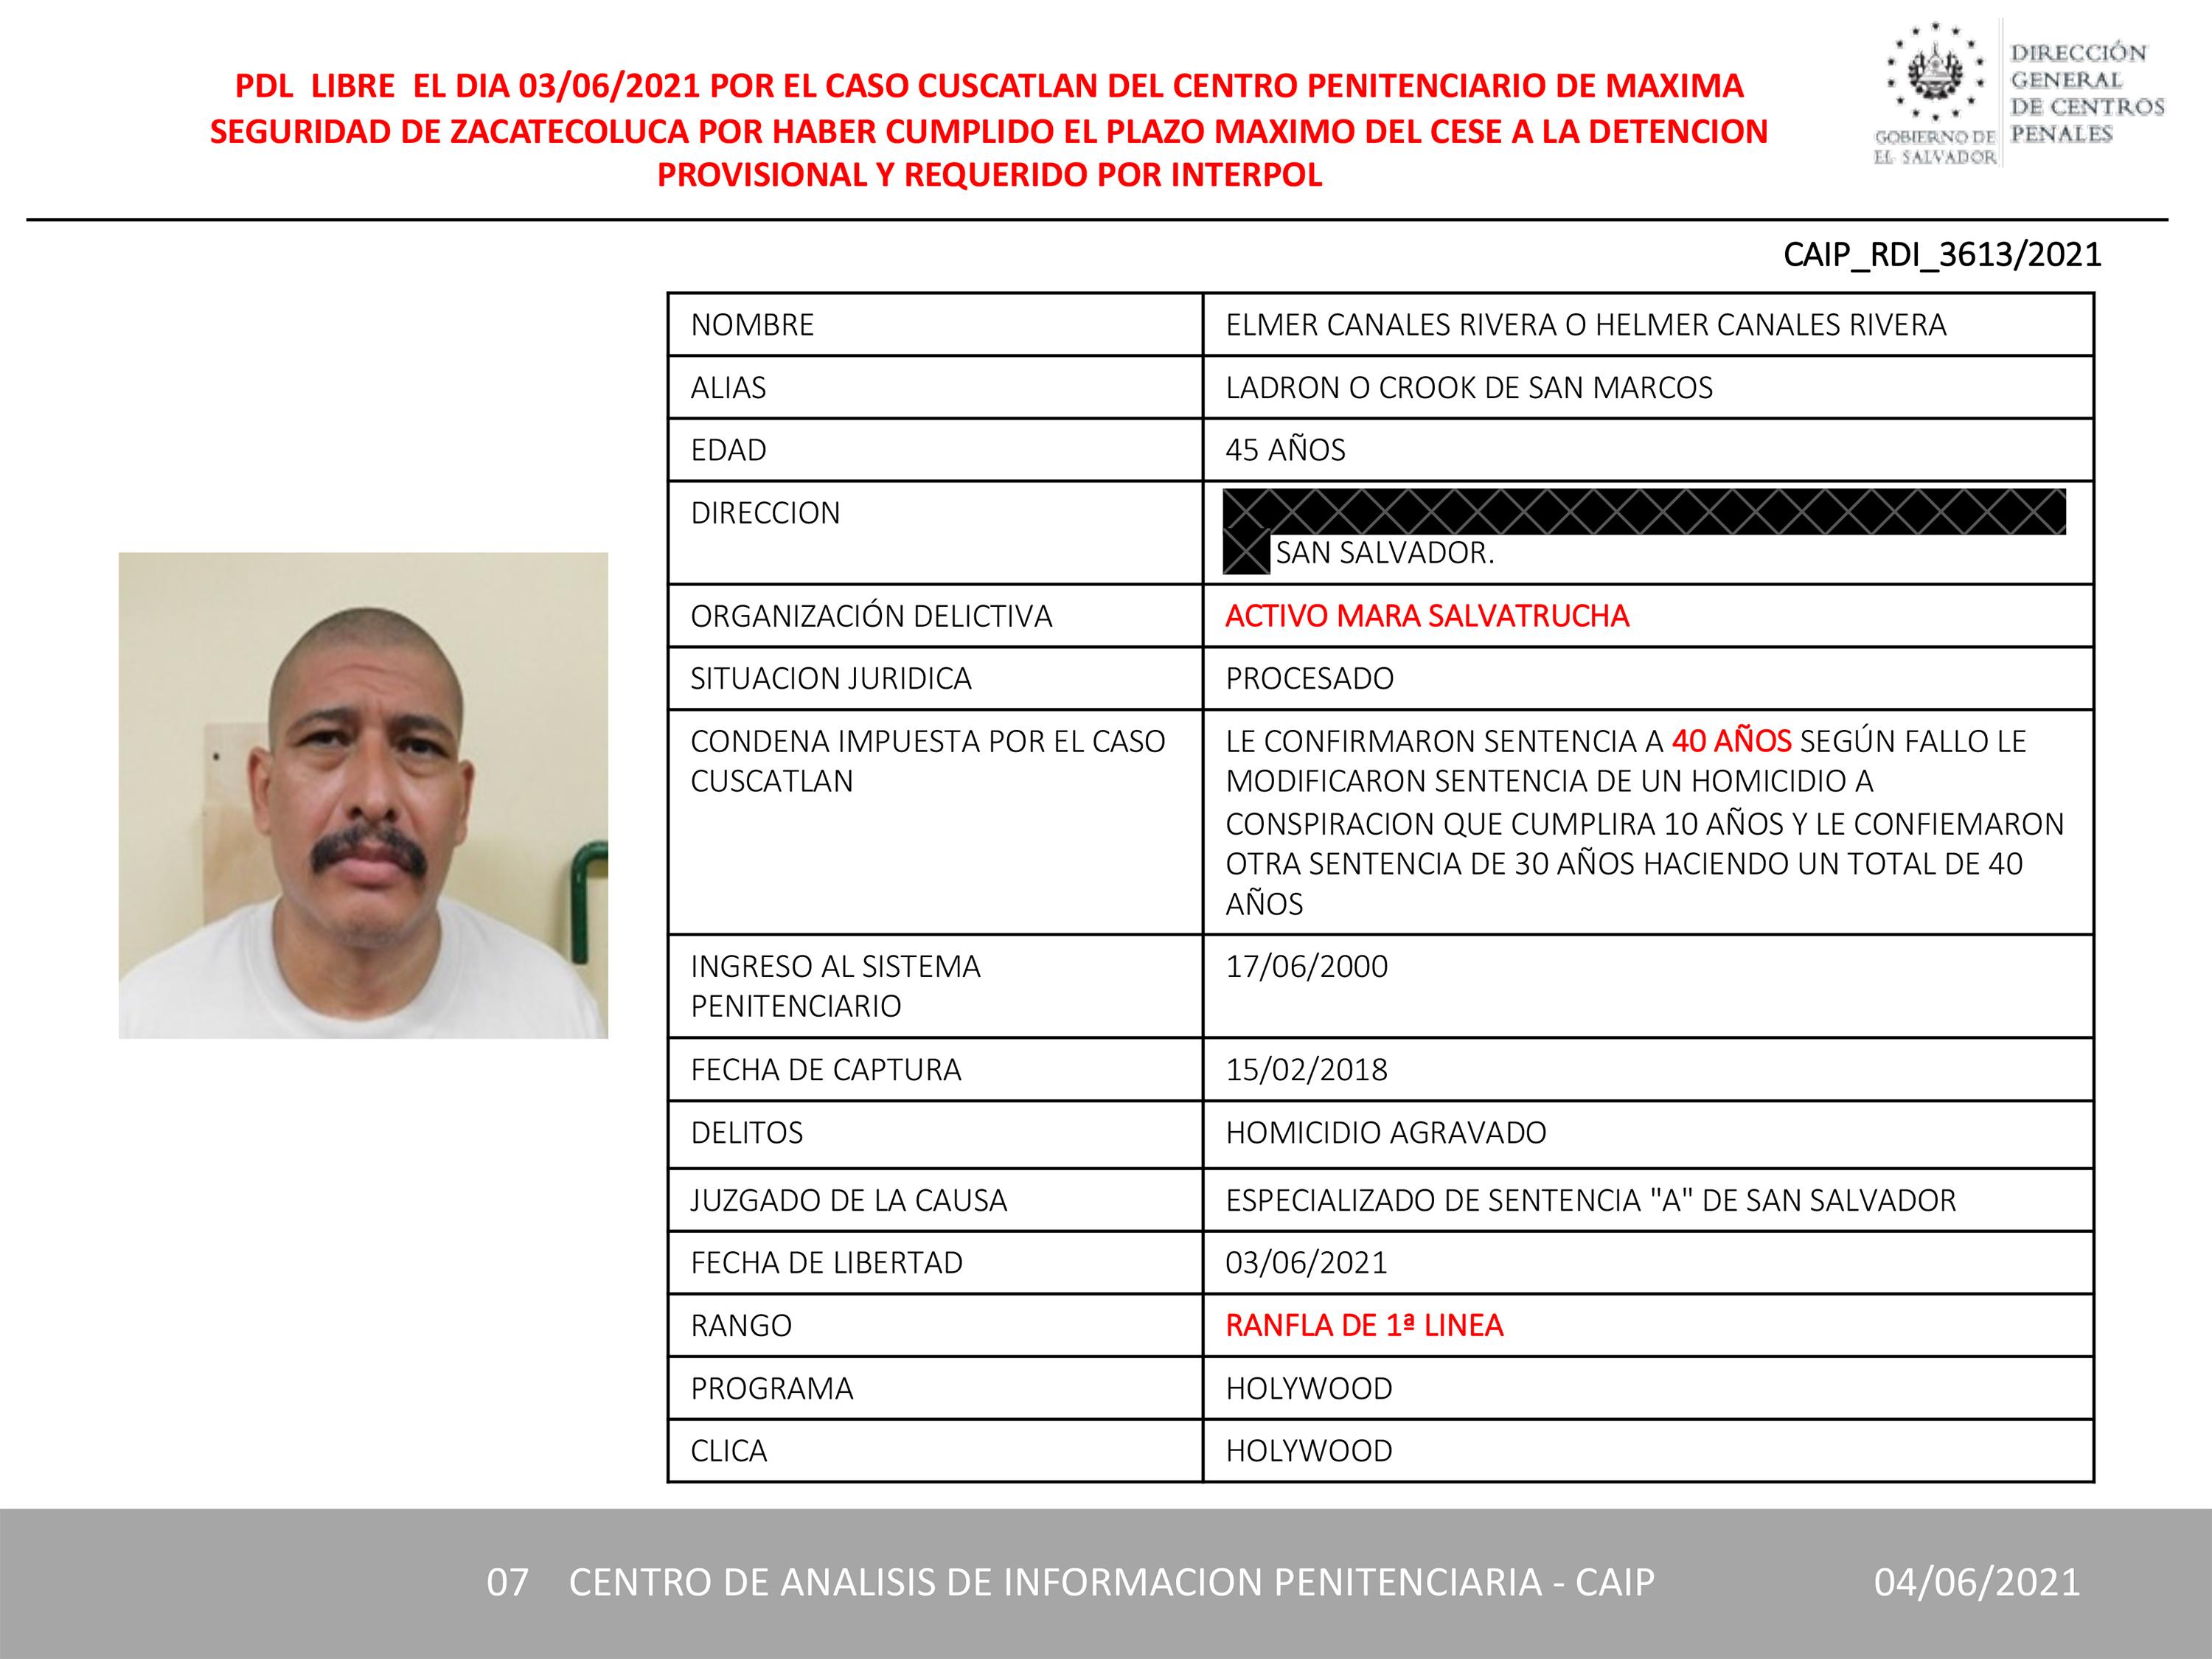 This police file, leaked by Guacamaya and obtained by El Faro, reveals that by June, 2021, the National Civil Police of El Salvador knew that Élmer Canales Rivera, Crook, owed four decades